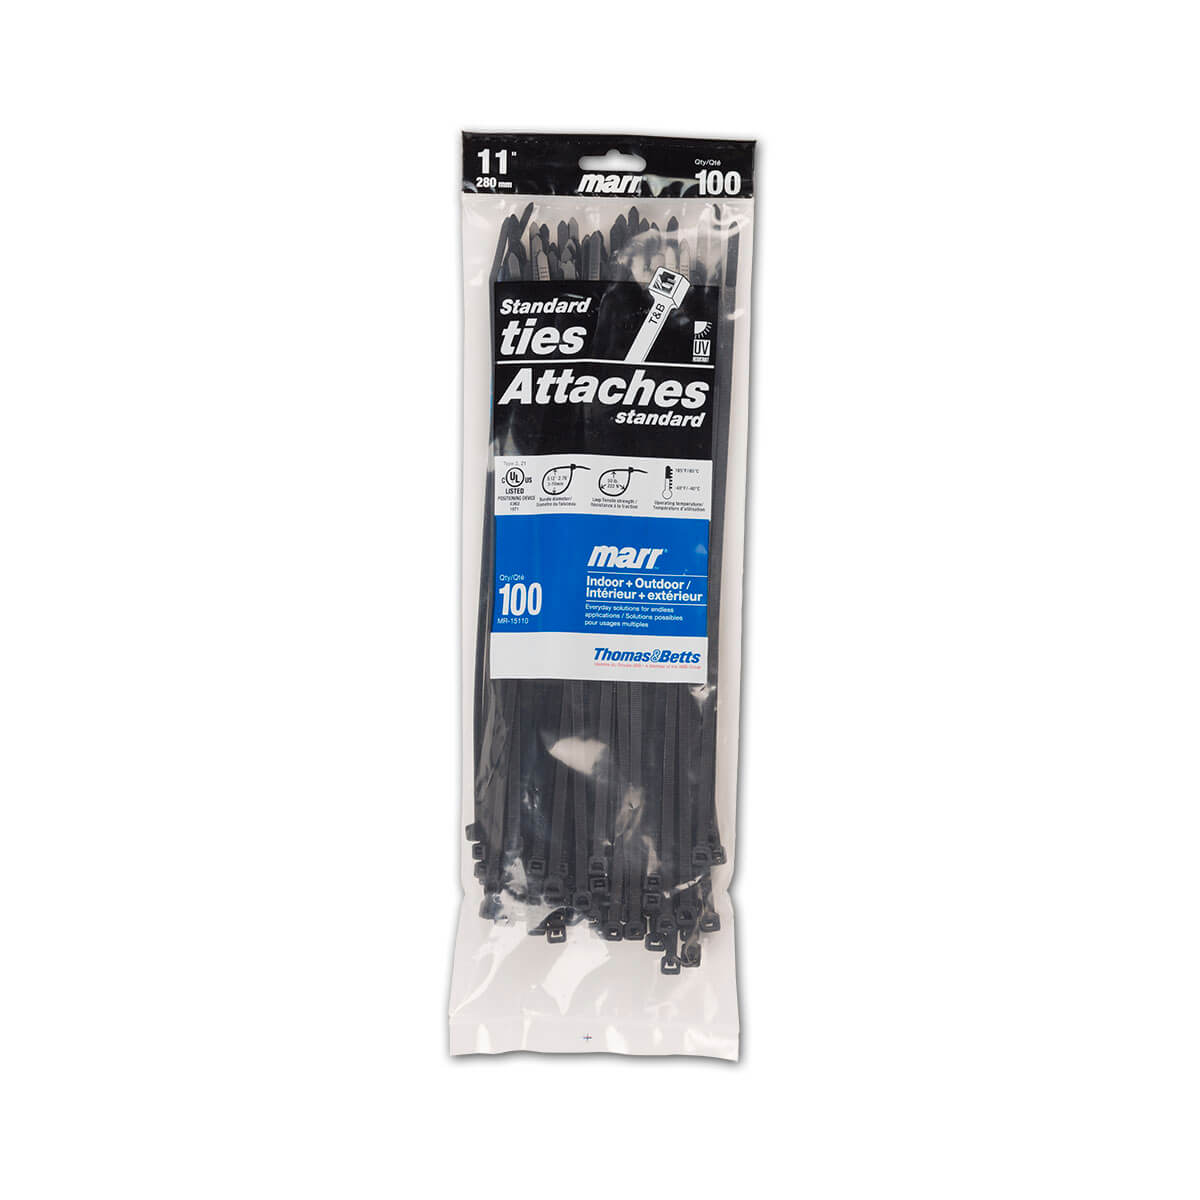 UV Black Twist Tail Cable Ties 11-in - Bag of 100